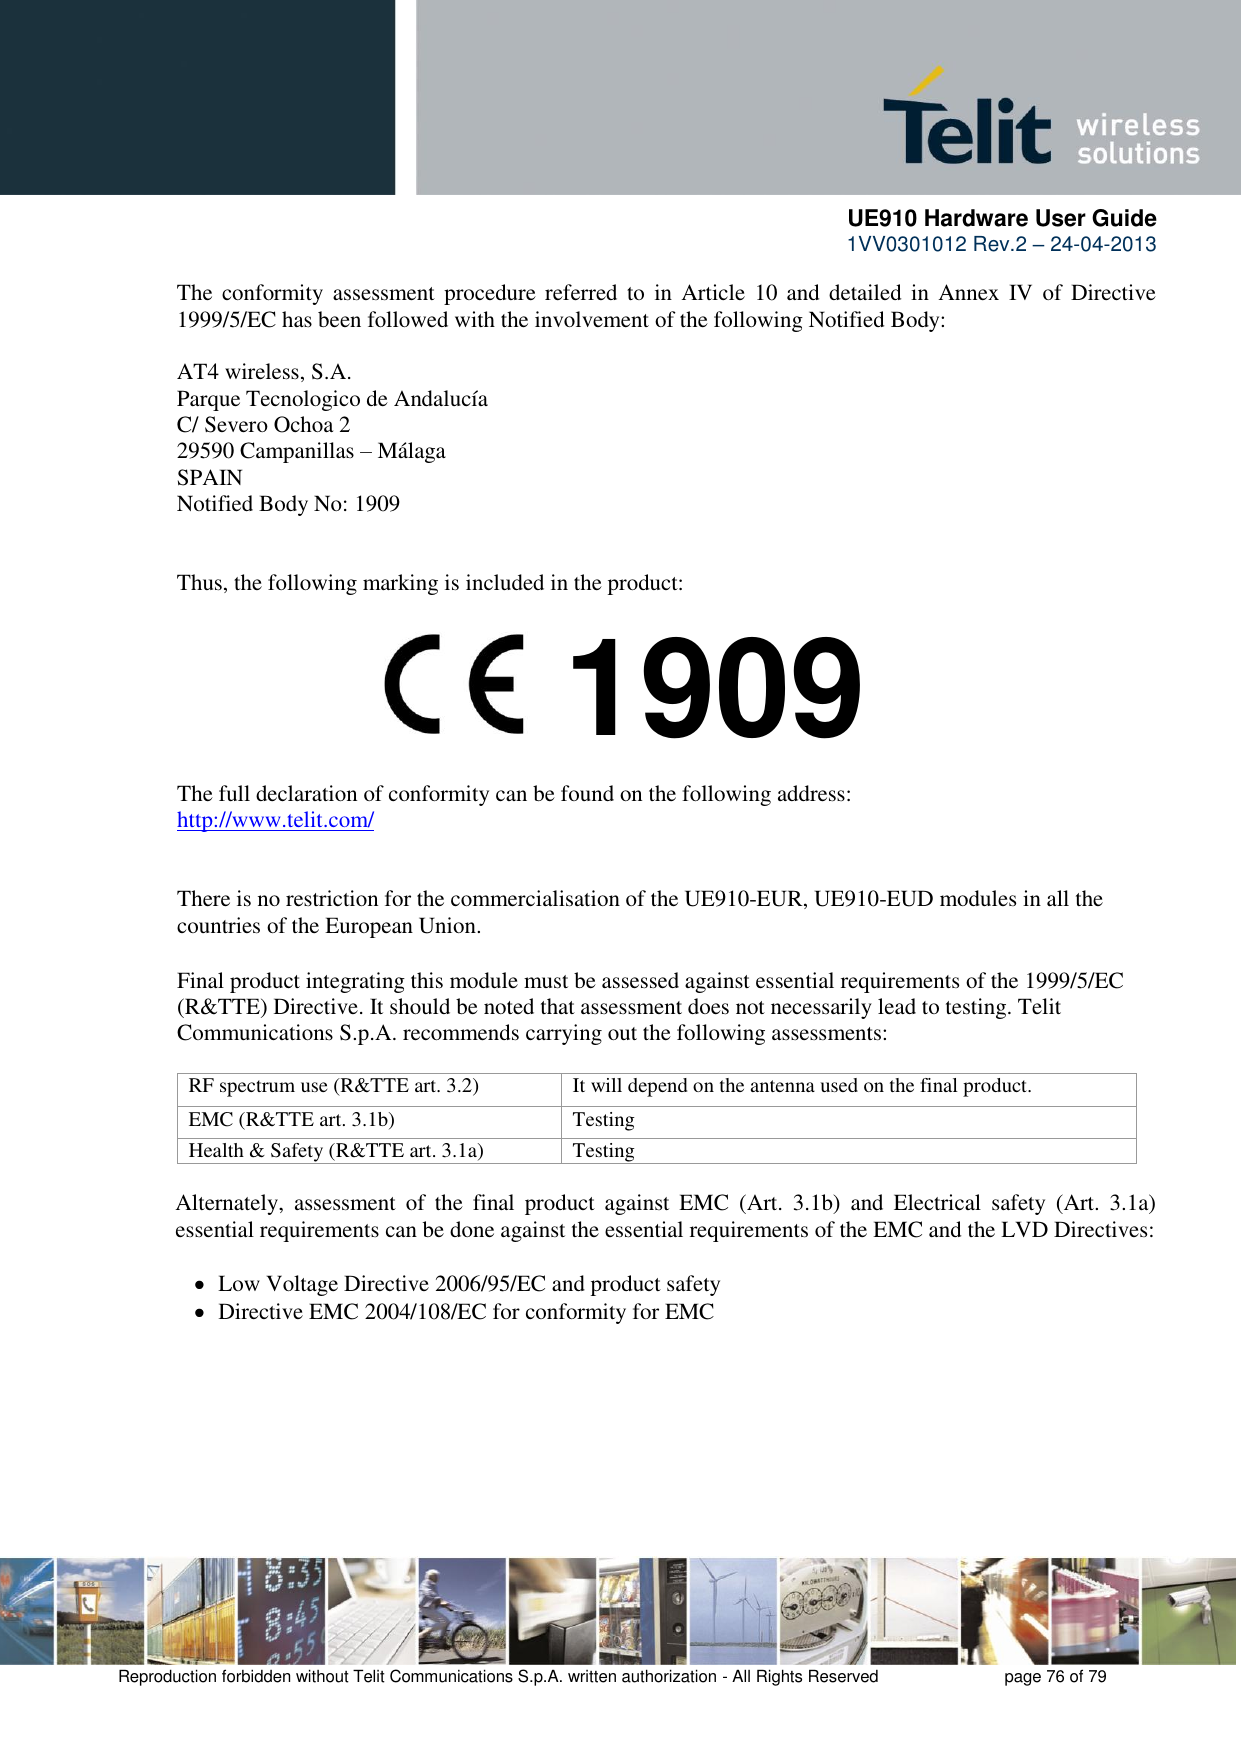      UE910 Hardware User Guide  1VV0301012 Rev.2 – 24-04-2013    Reproduction forbidden without Telit Communications S.p.A. written authorization - All Rights Reserved    page 76 of 79  The  conformity assessment  procedure  referred  to in  Article 10  and  detailed  in Annex  IV of  Directive 1999/5/EC has been followed with the involvement of the following Notified Body:  AT4 wireless, S.A. Parque Tecnologico de Andalucía C/ Severo Ochoa 2 29590 Campanillas – Málaga SPAIN Notified Body No: 1909   Thus, the following marking is included in the product:        The full declaration of conformity can be found on the following address: http://www.telit.com/   There is no restriction for the commercialisation of the UE910-EUR, UE910-EUD modules in all the countries of the European Union.  Final product integrating this module must be assessed against essential requirements of the 1999/5/EC (R&amp;TTE) Directive. It should be noted that assessment does not necessarily lead to testing. Telit Communications S.p.A. recommends carrying out the following assessments:  RF spectrum use (R&amp;TTE art. 3.2) It will depend on the antenna used on the final product. EMC (R&amp;TTE art. 3.1b) Testing Health &amp; Safety (R&amp;TTE art. 3.1a) Testing  Alternately,  assessment  of  the  final  product  against  EMC  (Art.  3.1b)  and  Electrical  safety  (Art.  3.1a) essential requirements can be done against the essential requirements of the EMC and the LVD Directives:     Low Voltage Directive 2006/95/EC and product safety    Directive EMC 2004/108/EC for conformity for EMC 1909 